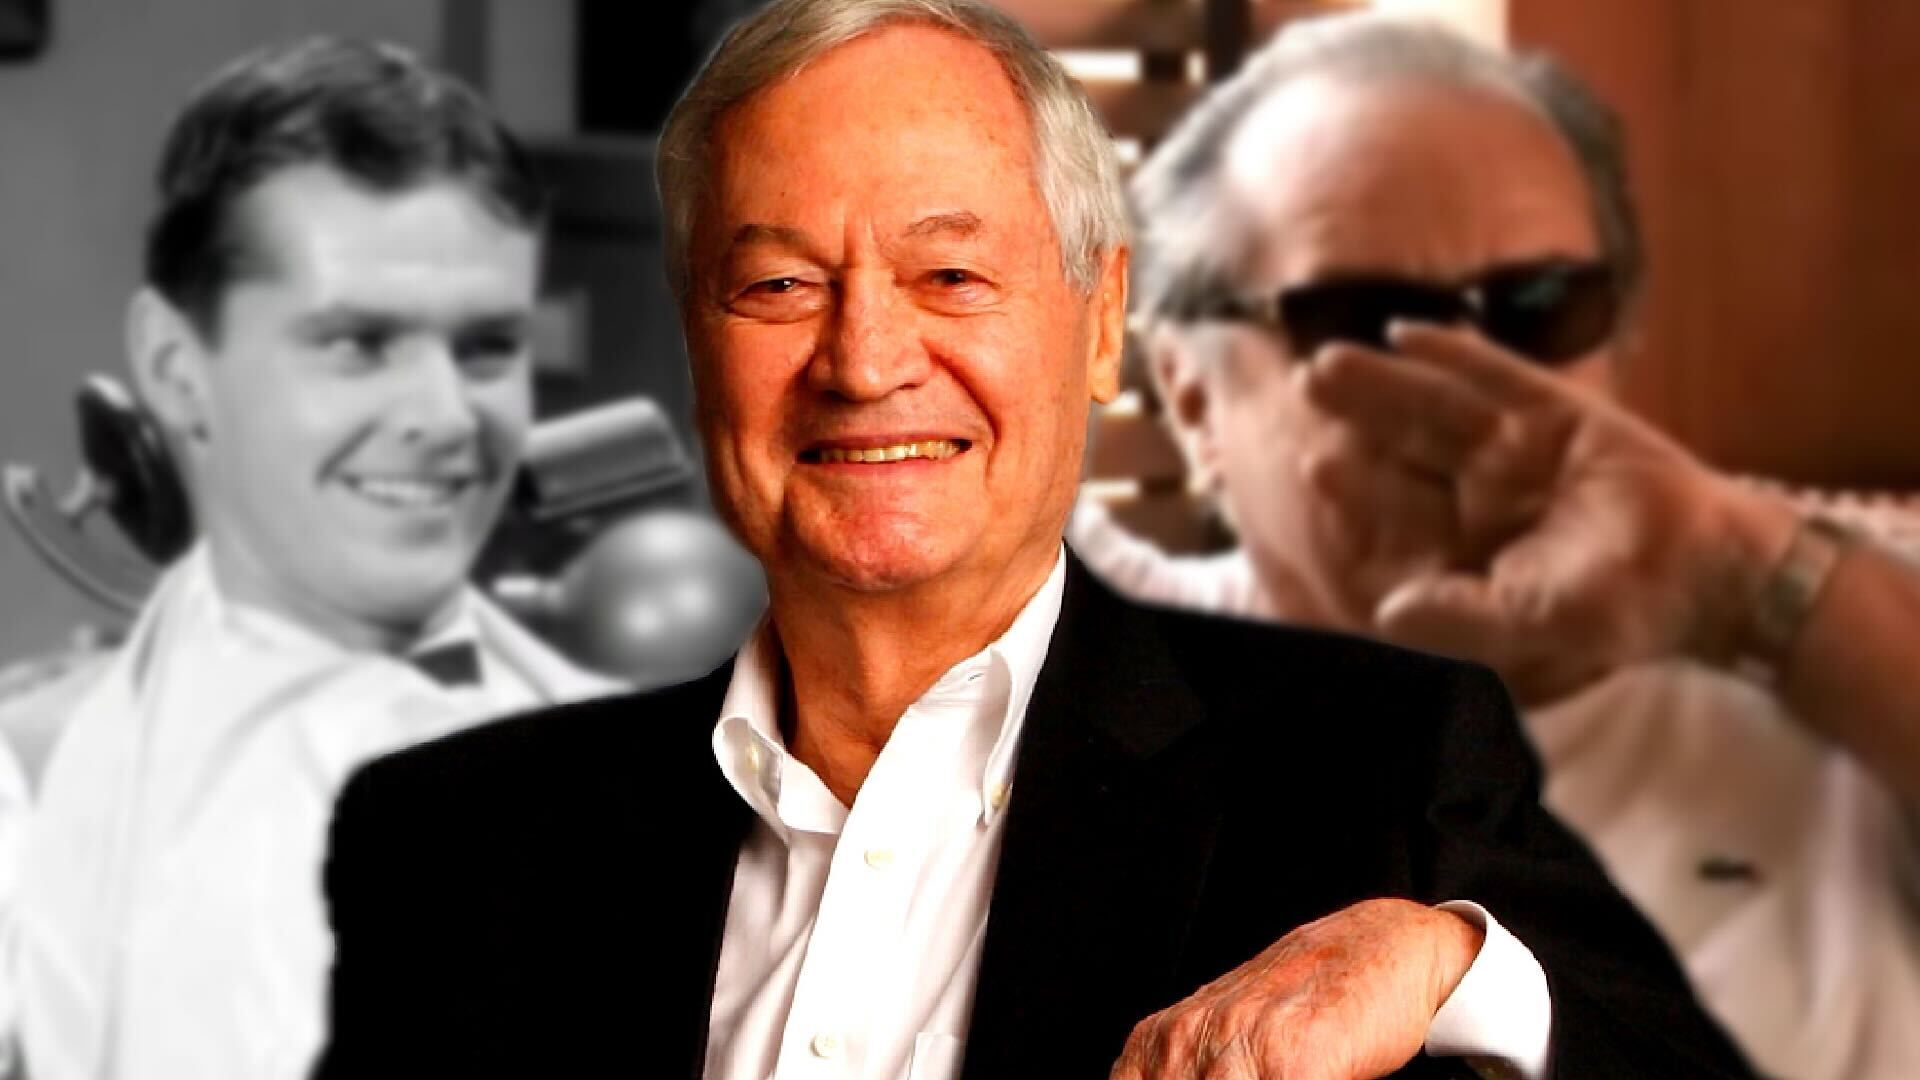 Roger Corman with Jack Nicholson in the background